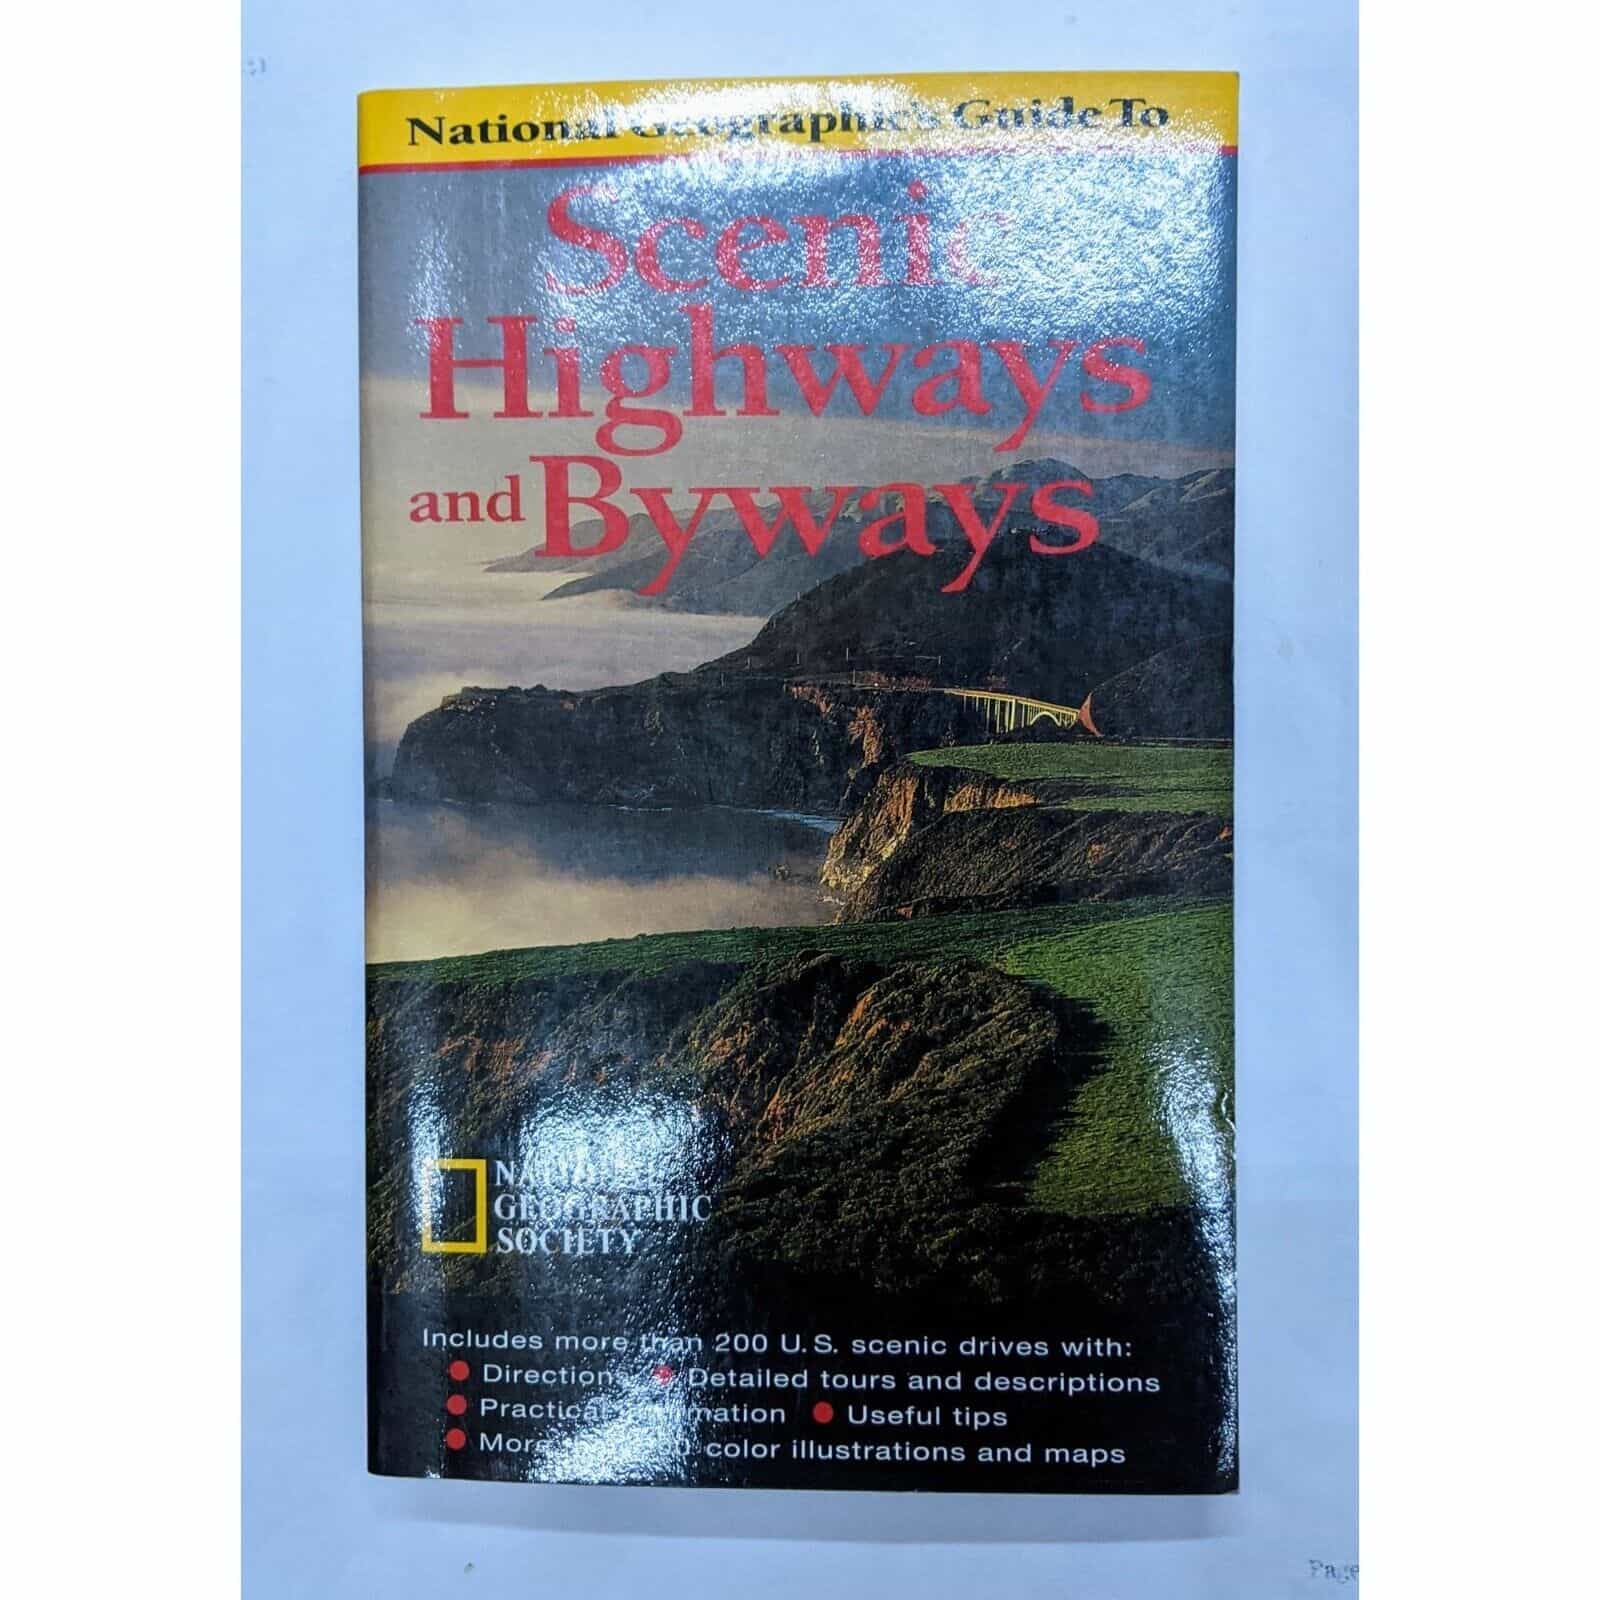 National Geographic’s Guide To Scenic Highways and Byways Book